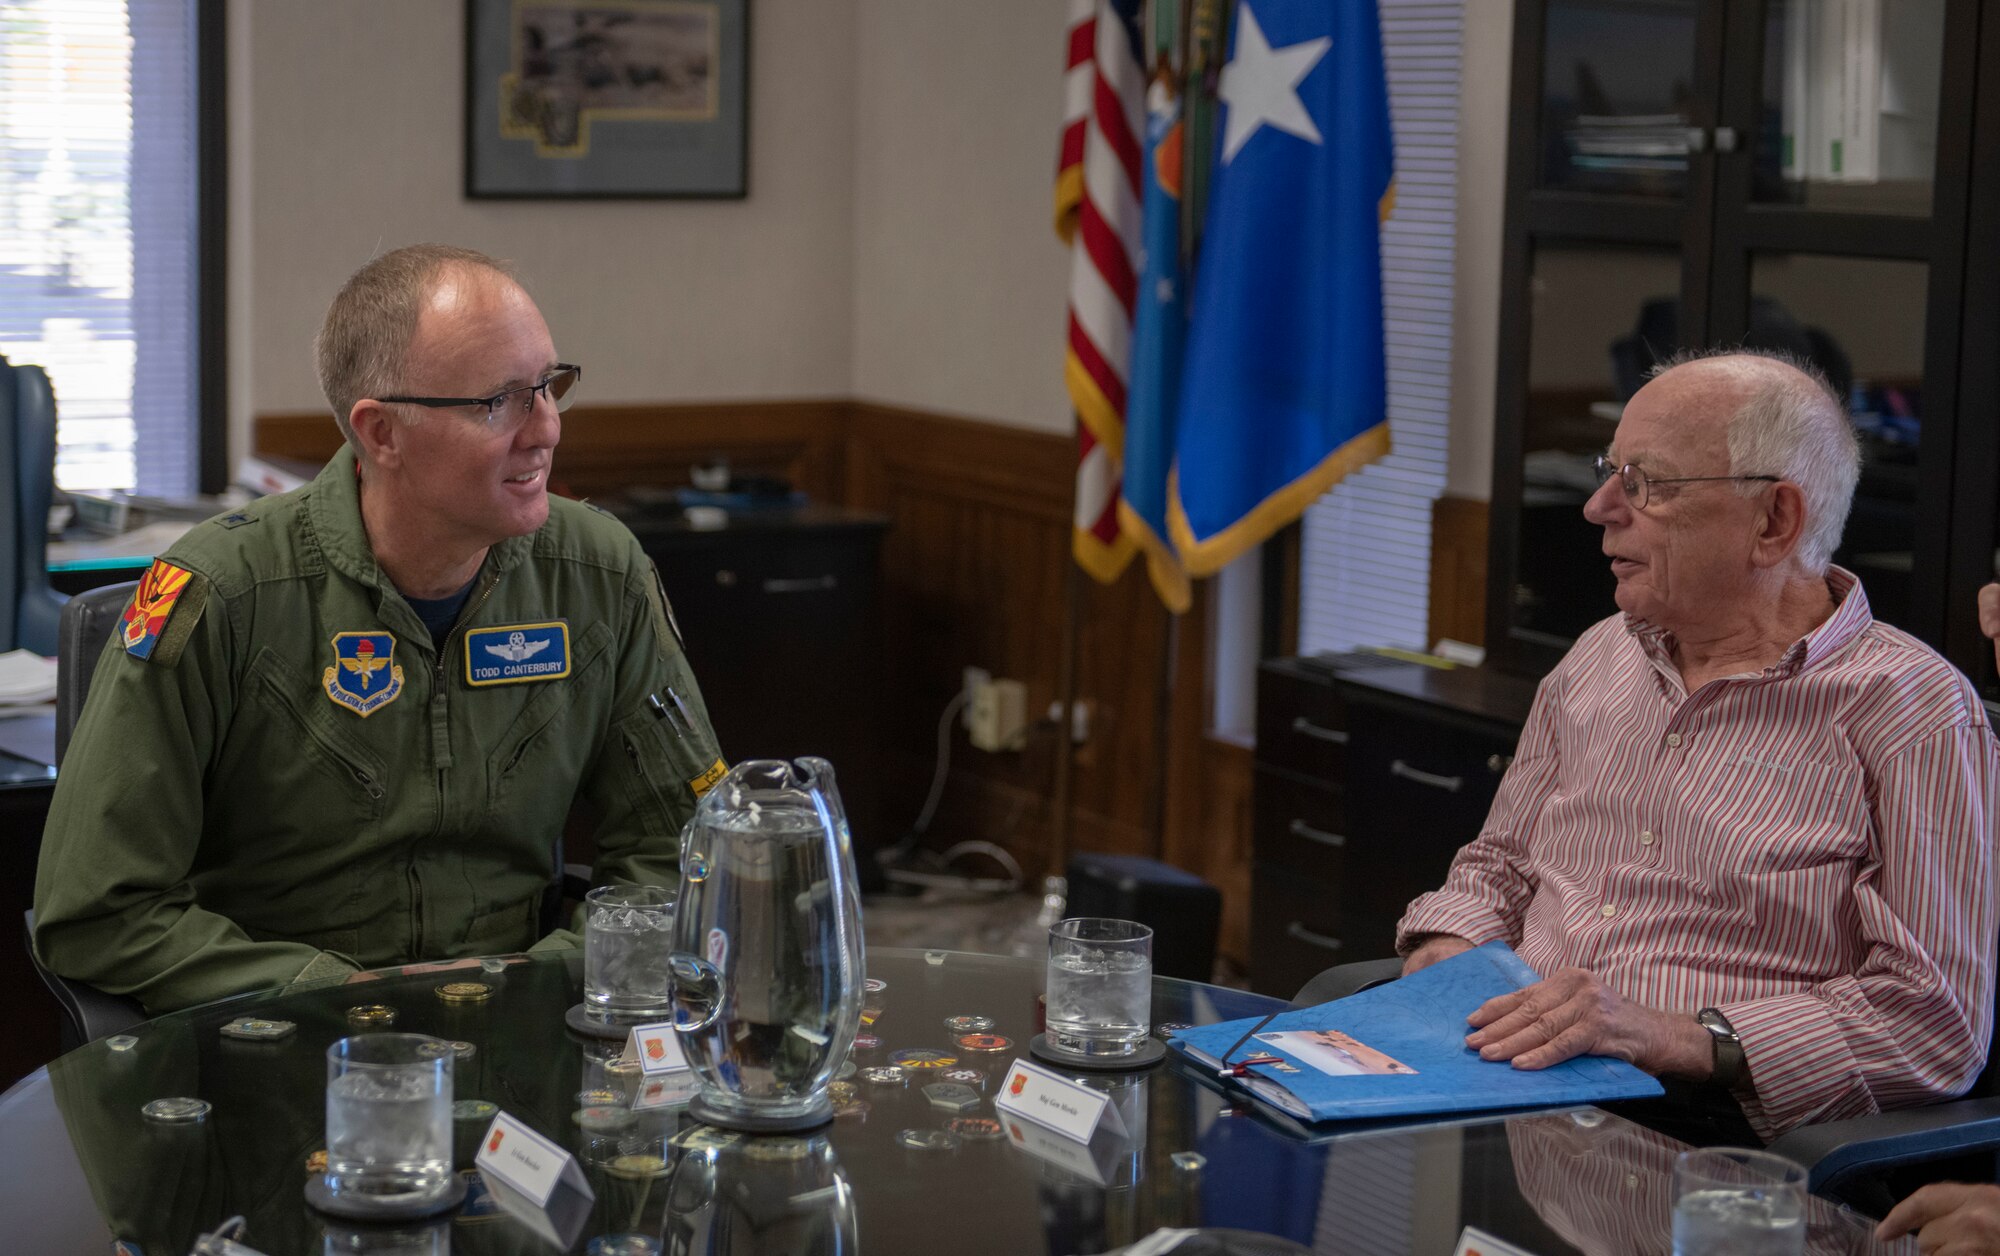 Brig. Gen. Todd D. Canterbury, 56th Fighter Wing commander, speaks to retired German air force Maj. Gen. Hans Juergen Merkle, former commander of the Cactus Starfighter Squadron, Oct. 18, 2019, at Luke Air Force Base, Ariz.